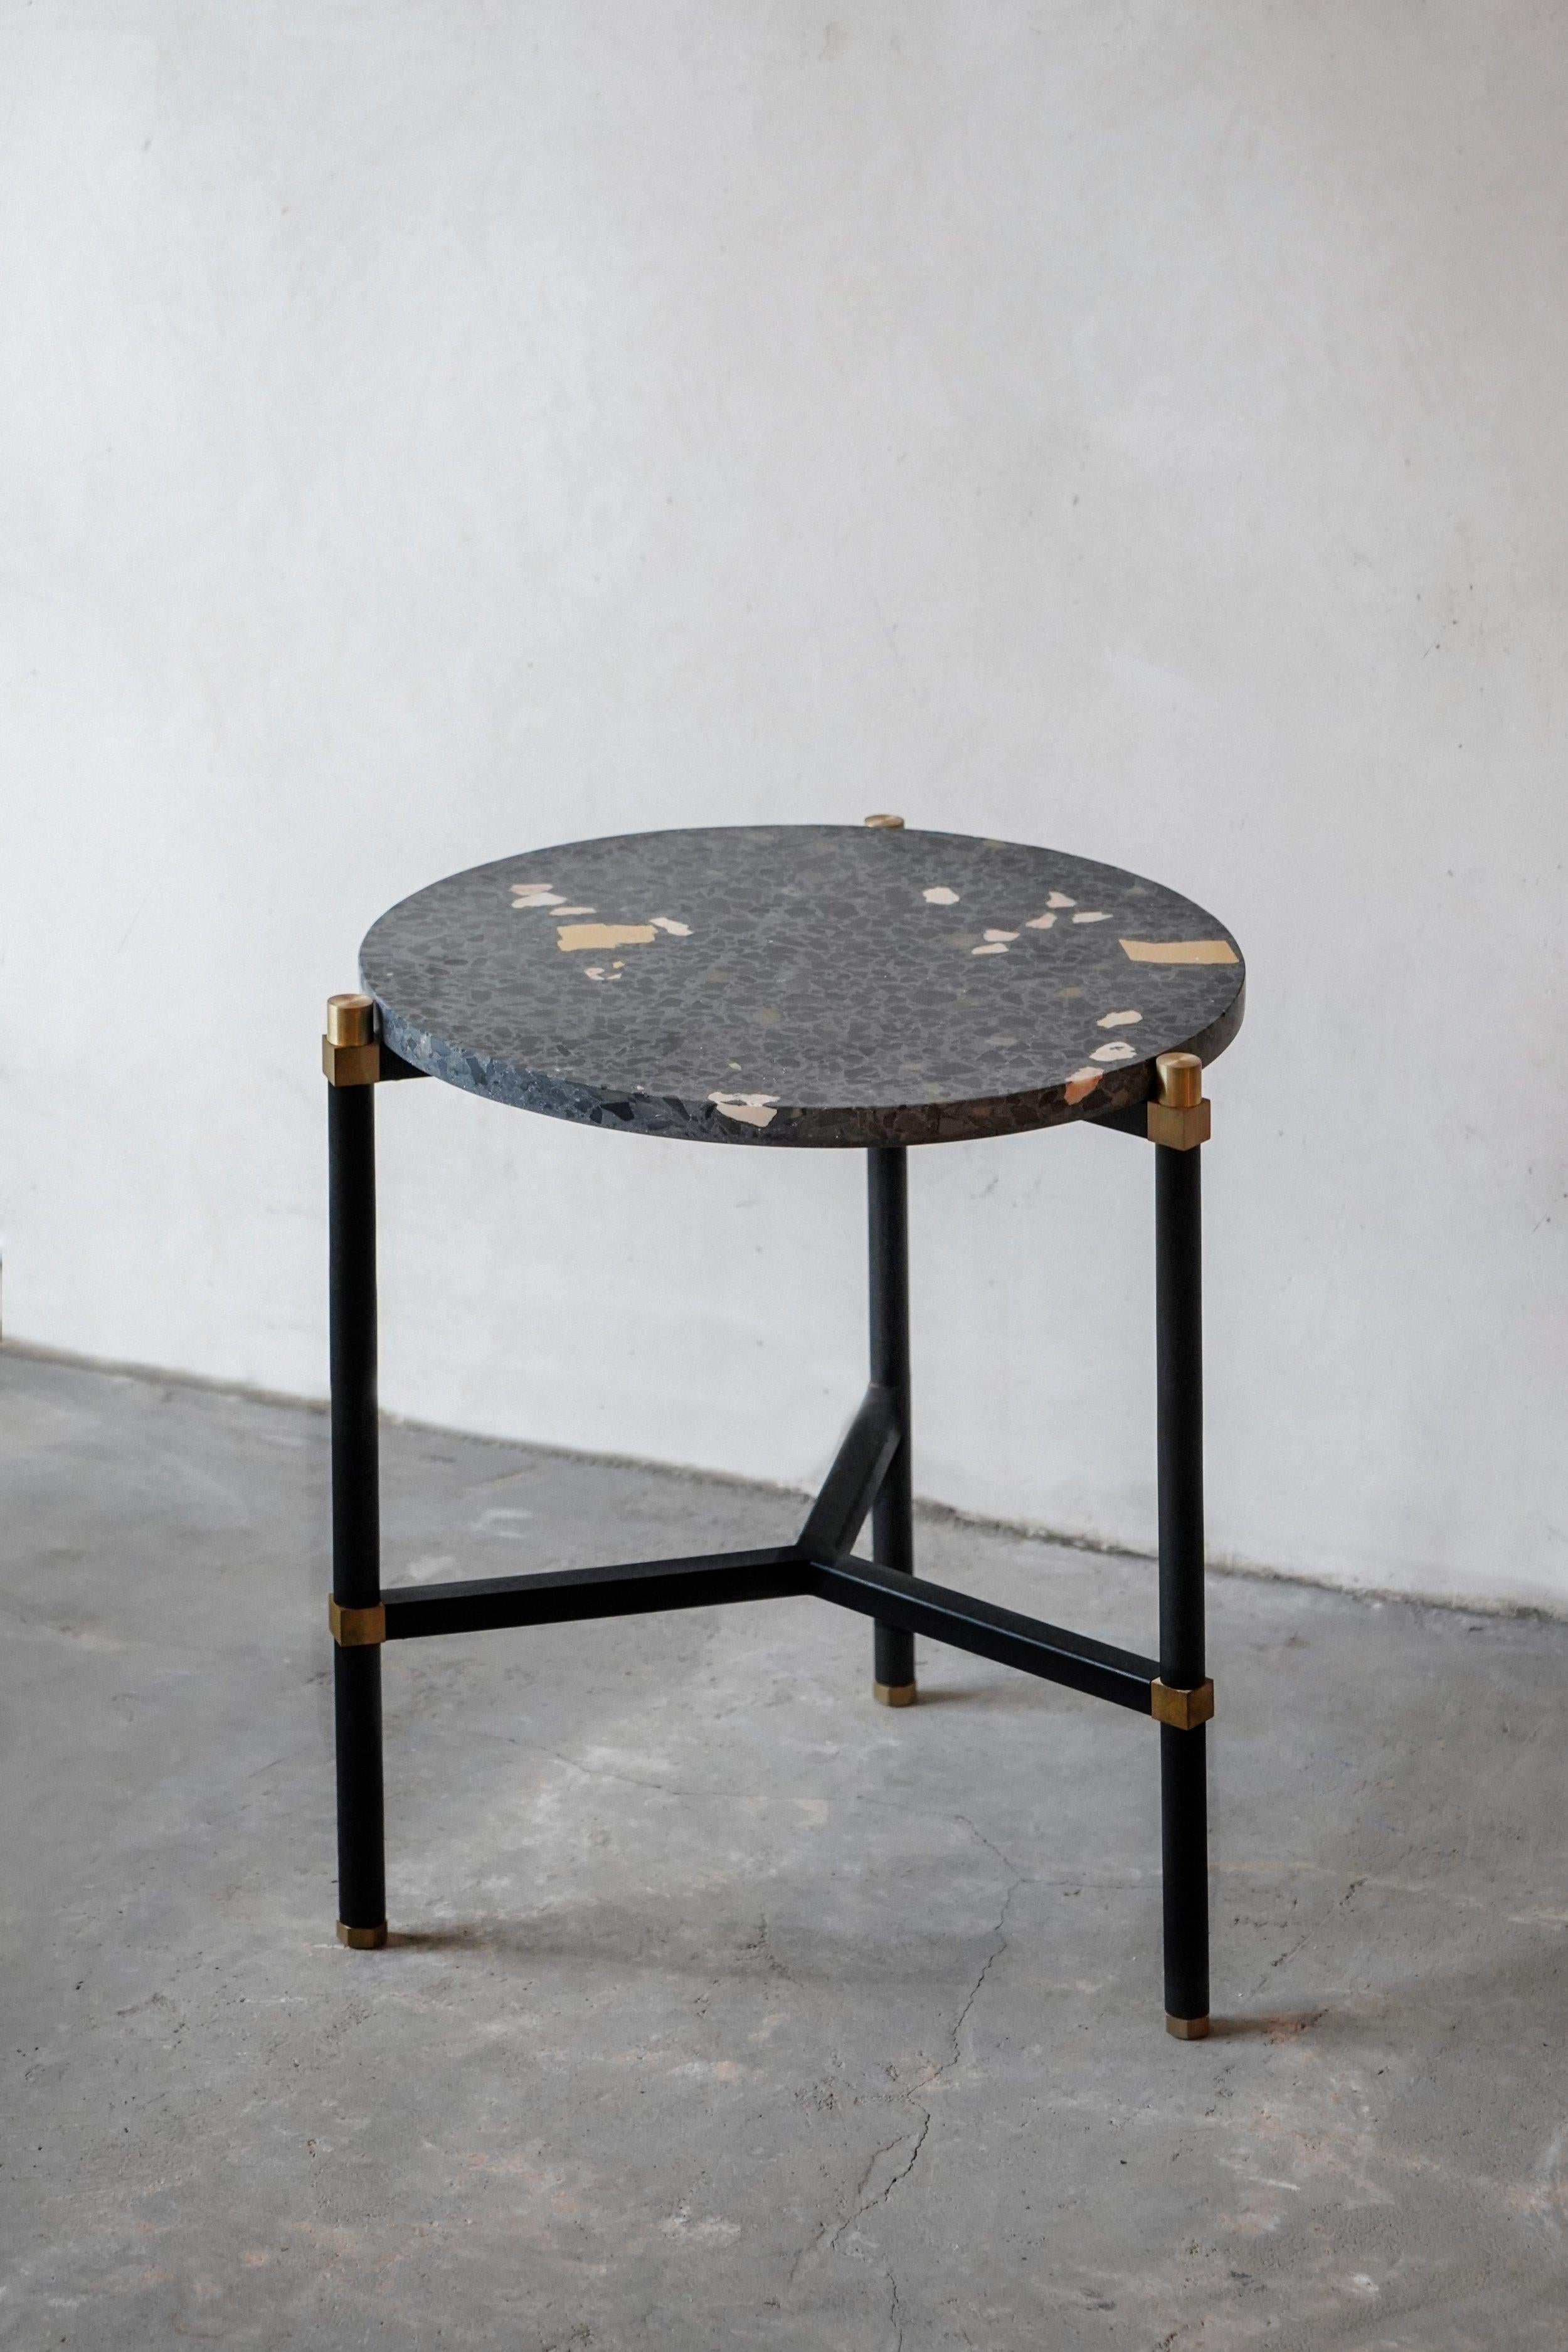 Simple side table 40 3 legs by Contain.
Dimensions: D 40 x H 51 cm.
Materials: iron, brass, terrazzo, marble, stone.
Available in different finishes and dimensions. 

The Connector furniture collection is based on single assembly pieces that